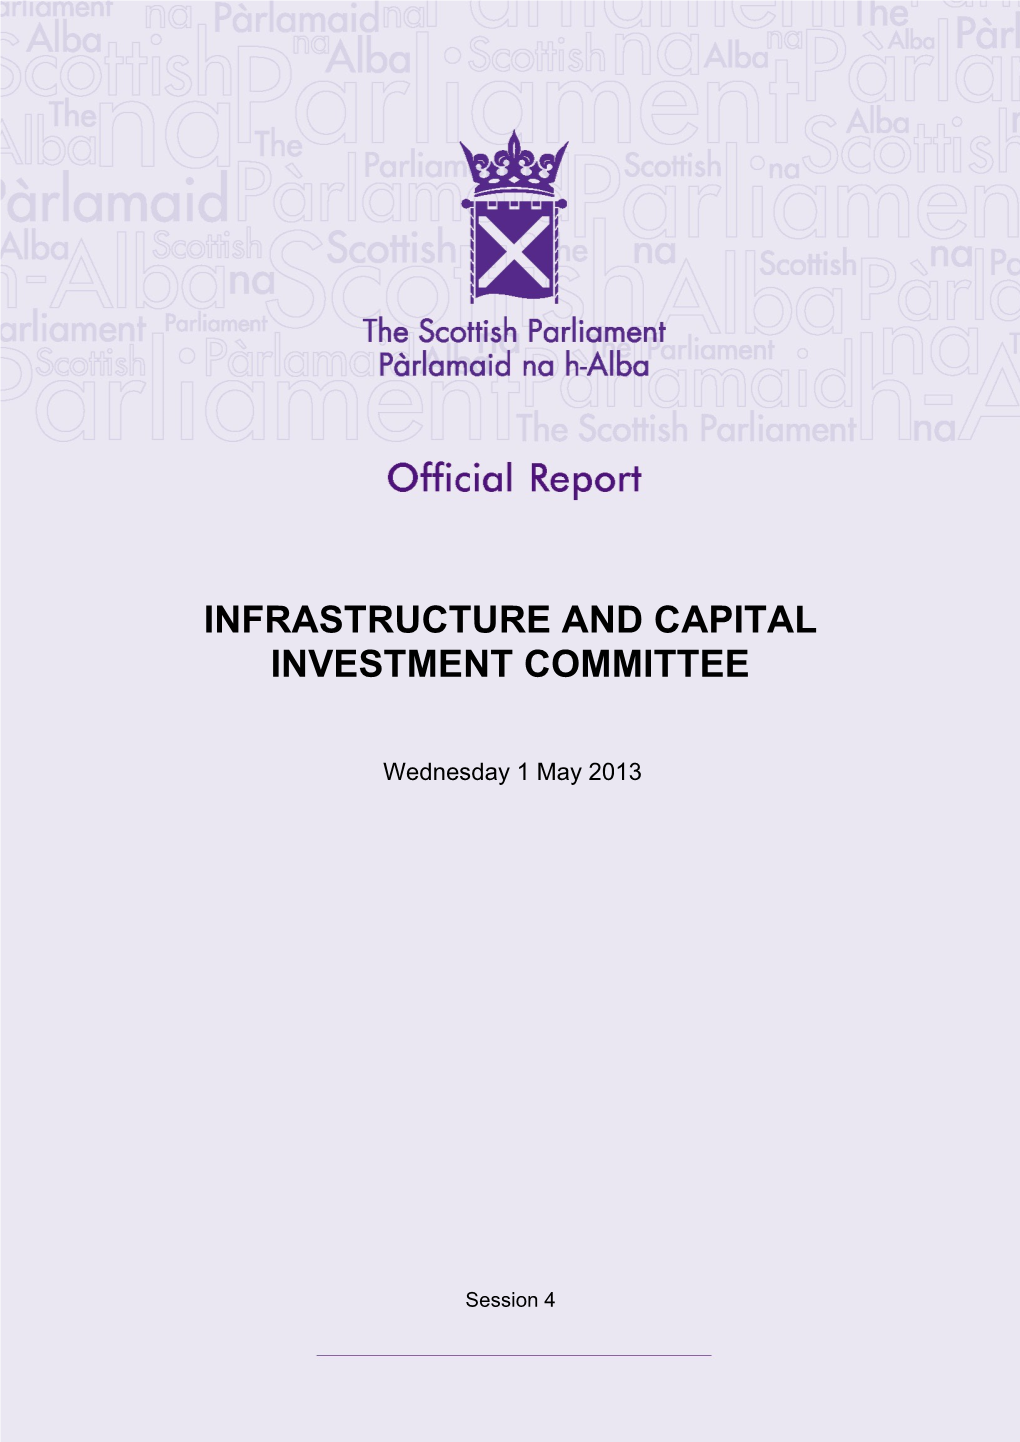 Infrastructure and Capital Investment Committee